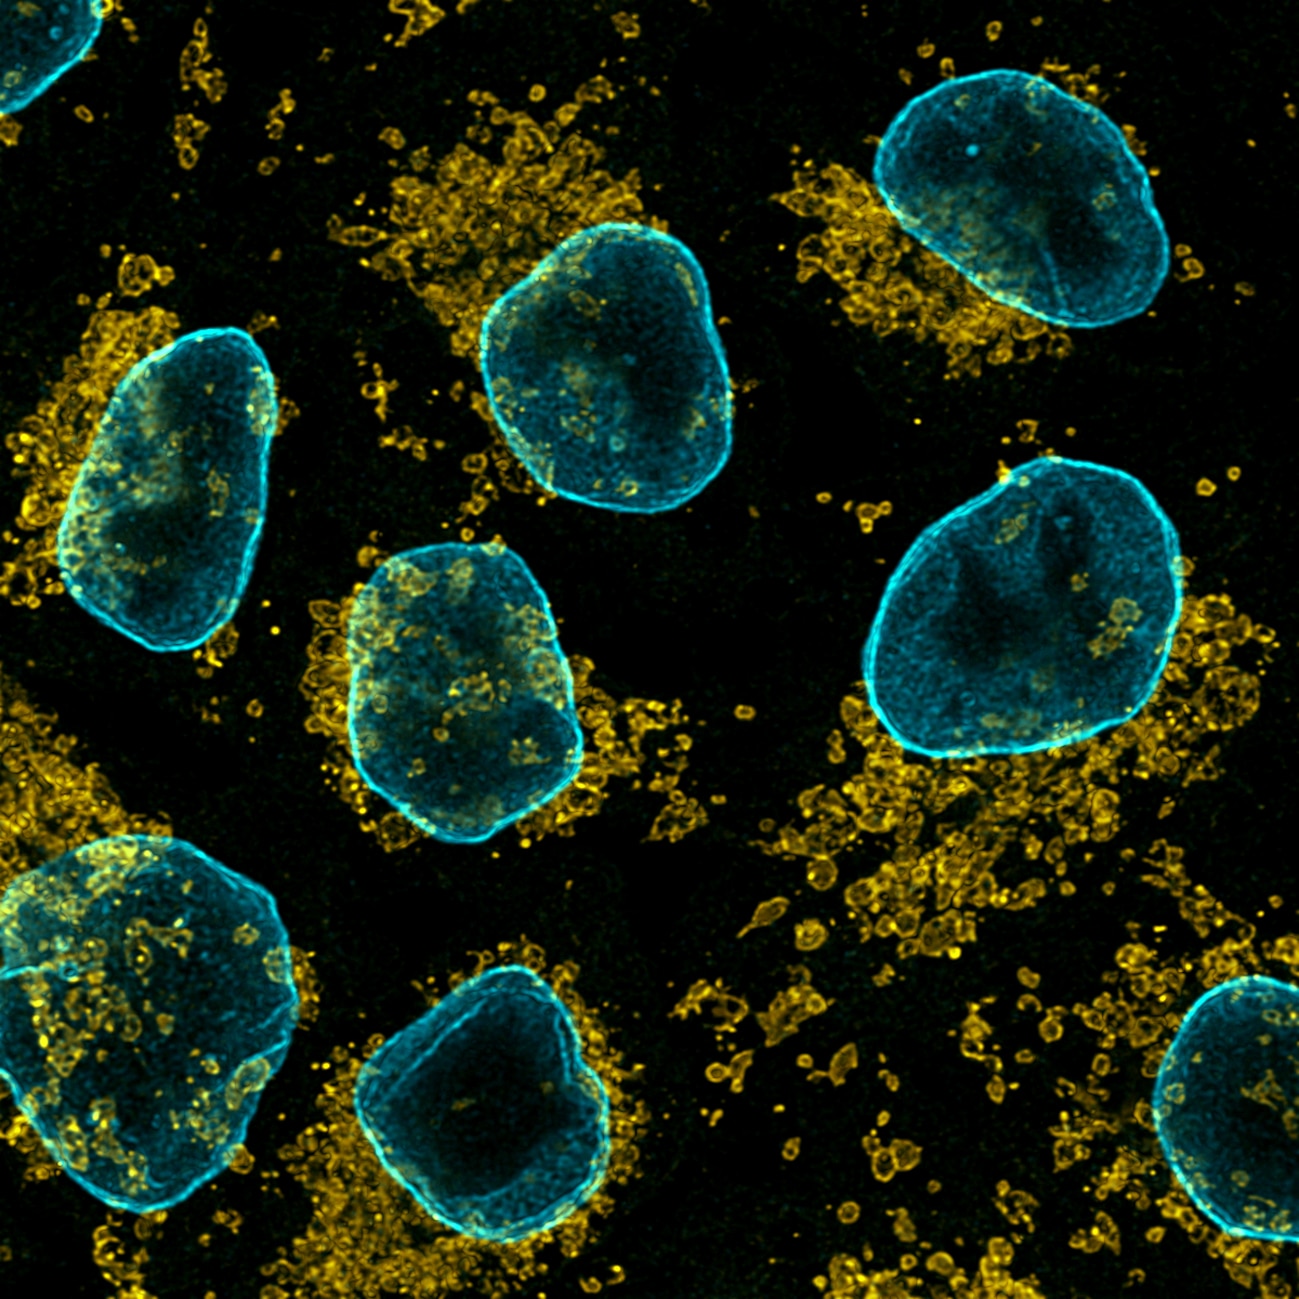 Immunofluorescence of HeLa: PFA-fixed HeLa cells were stained with anti-TOM20 antibody (11802-1-AP) labeled with FlexAble CoraLite Plus 550 Kit (KFA002, yellow) and anti-Lamin B1 antibody (12987-1-AP) labeled with FlexAble CoraLite Plus 650 Kit (KFA003, cyan). Confocal images were acquired with a 100x oil objective and post-processed. Images were recorded at the Core Facility Bioimaging at the Biomedical Center, LMU Munich.